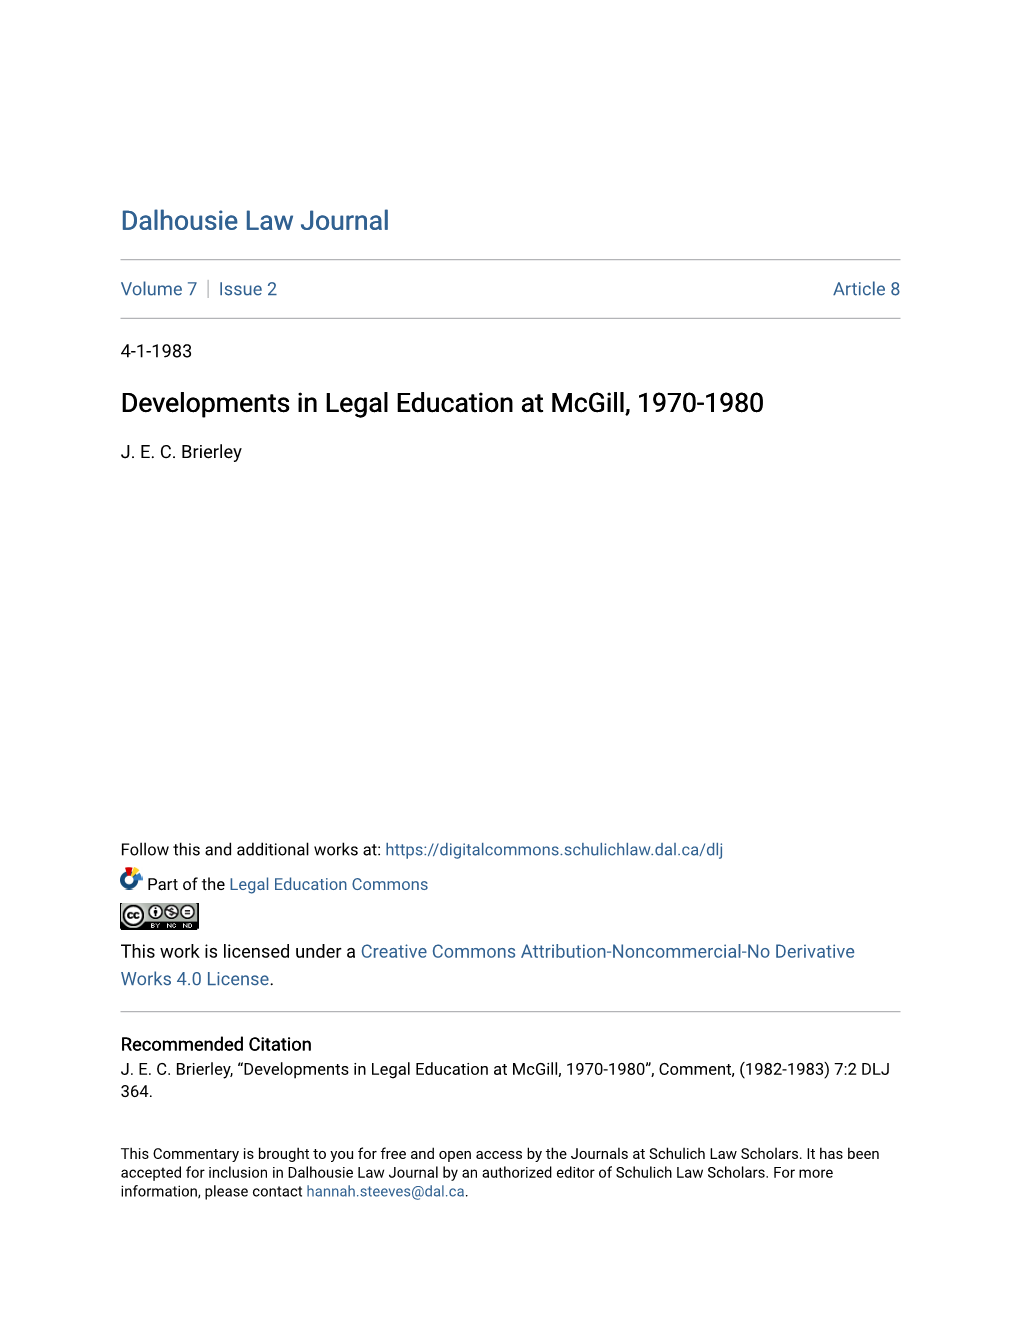 Developments in Legal Education at Mcgill, 1970-1980